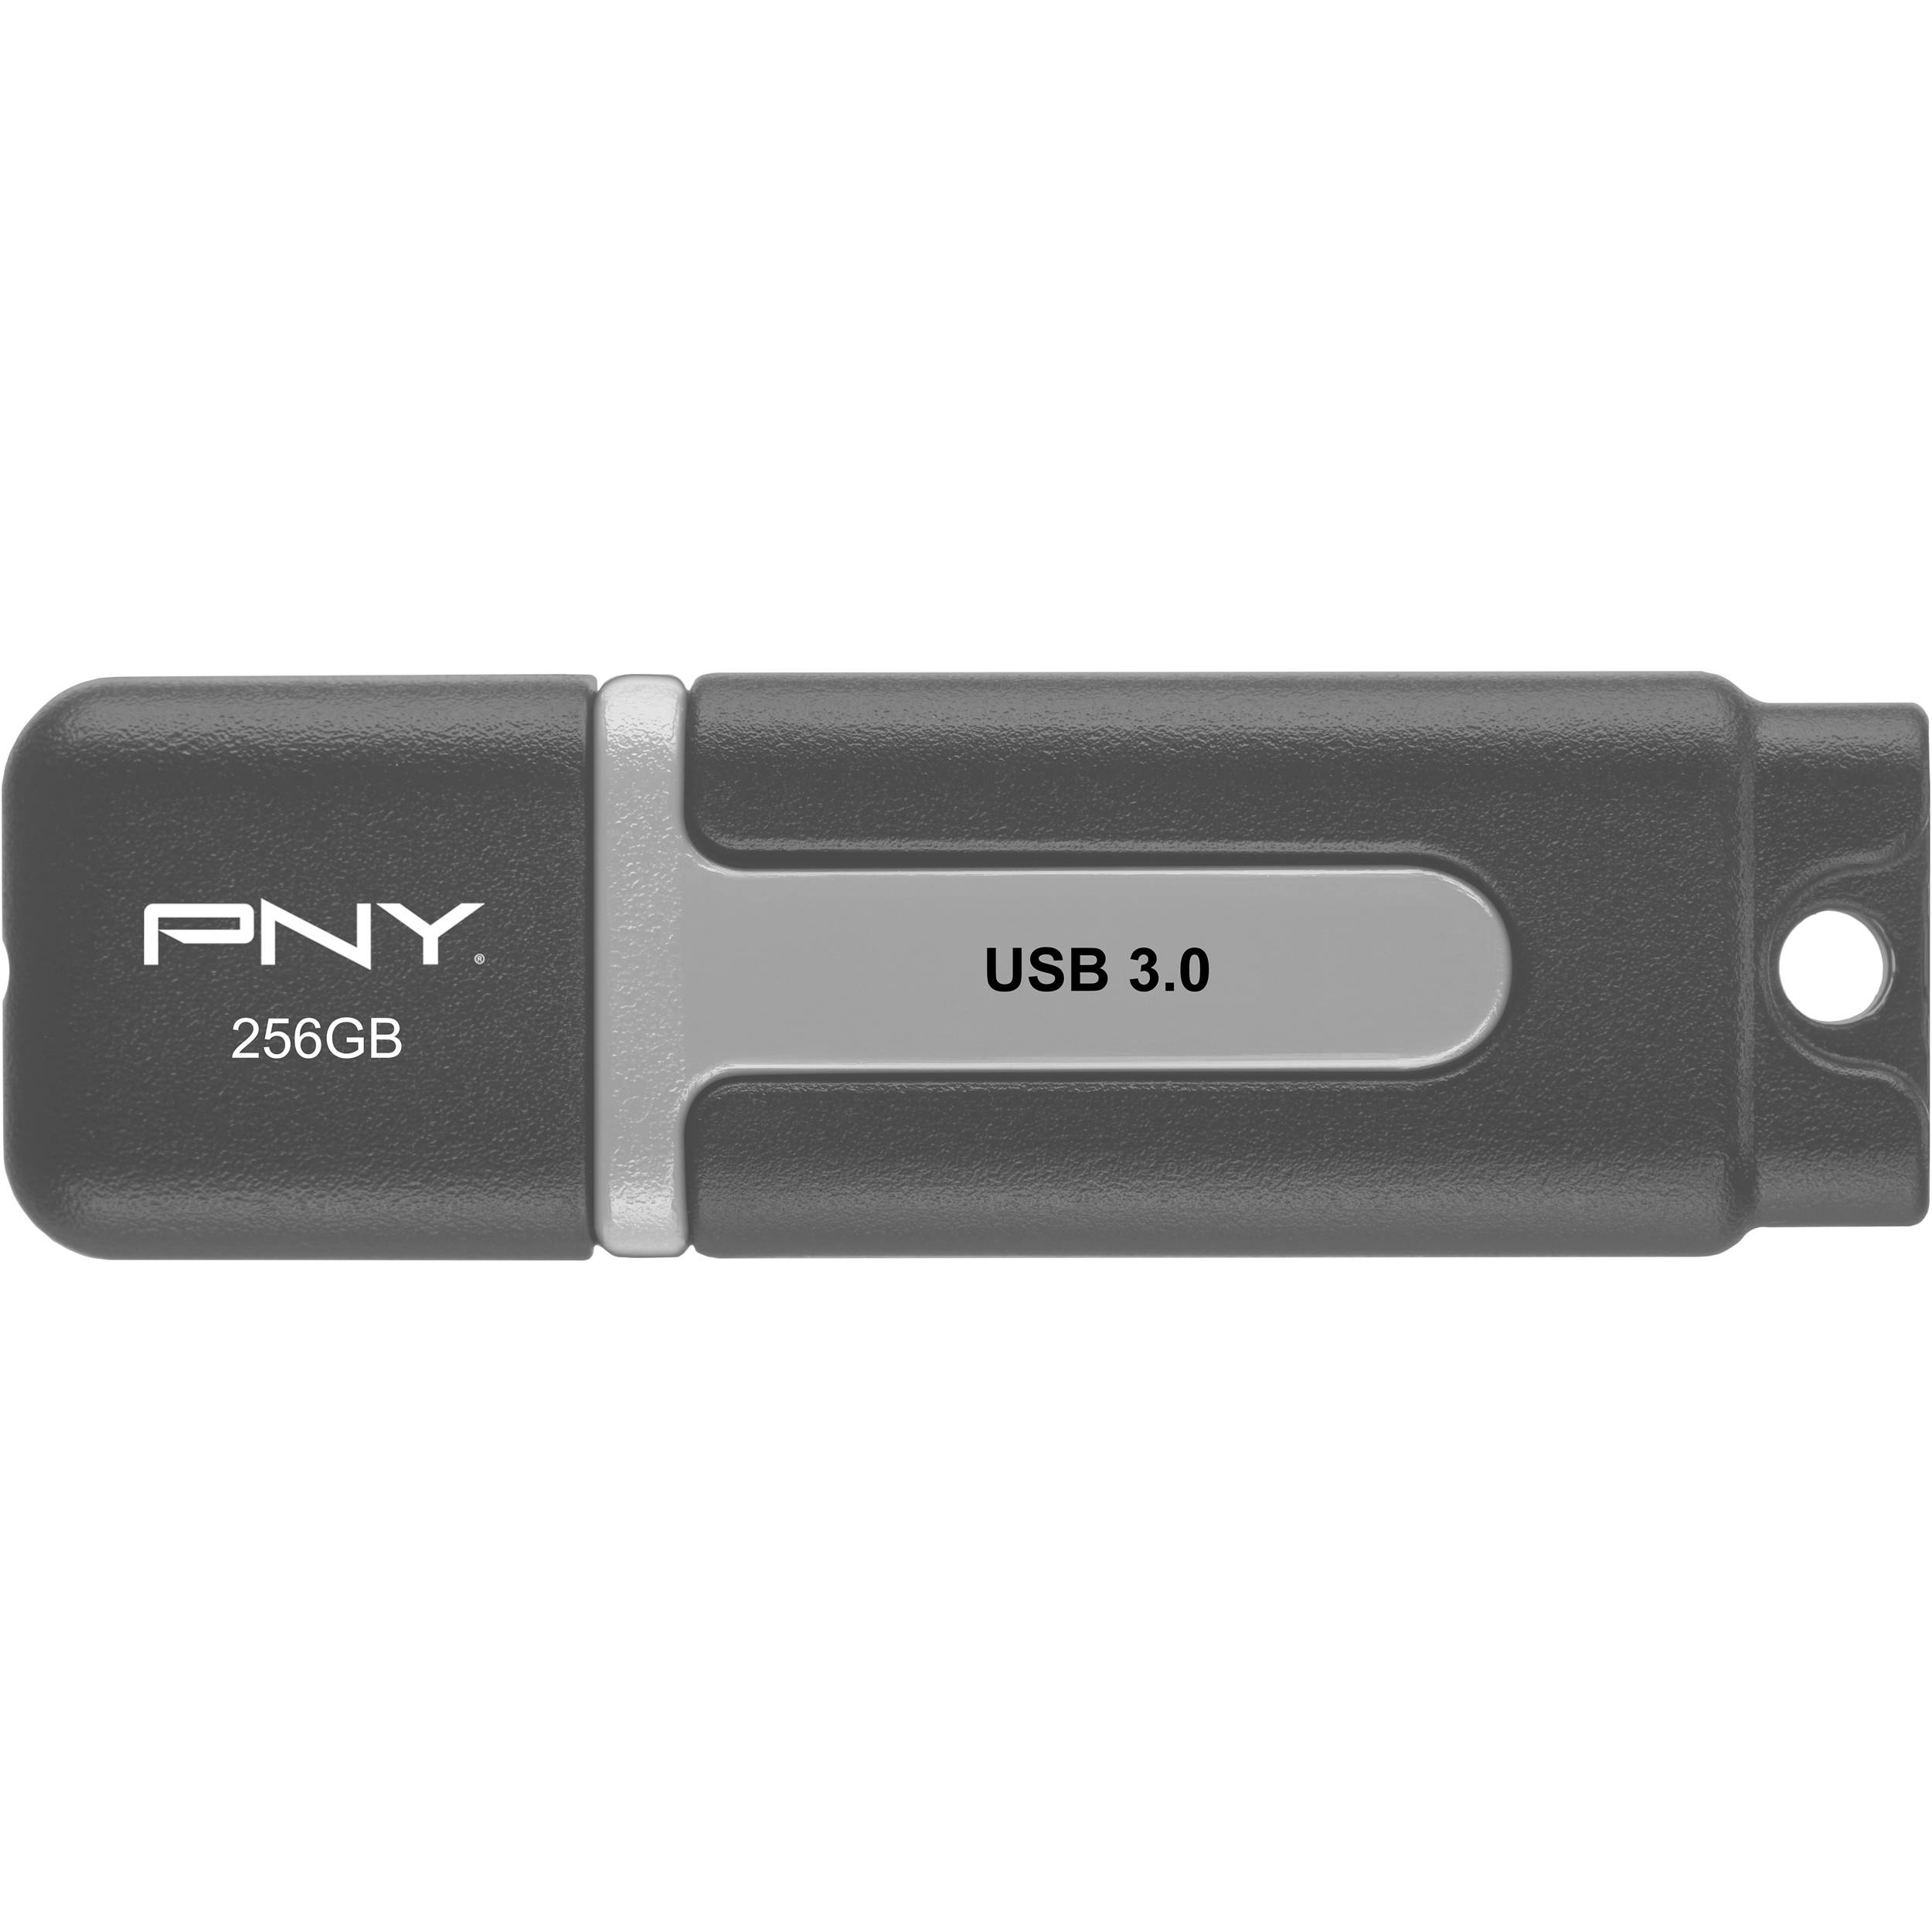 how to use a pny flash drive